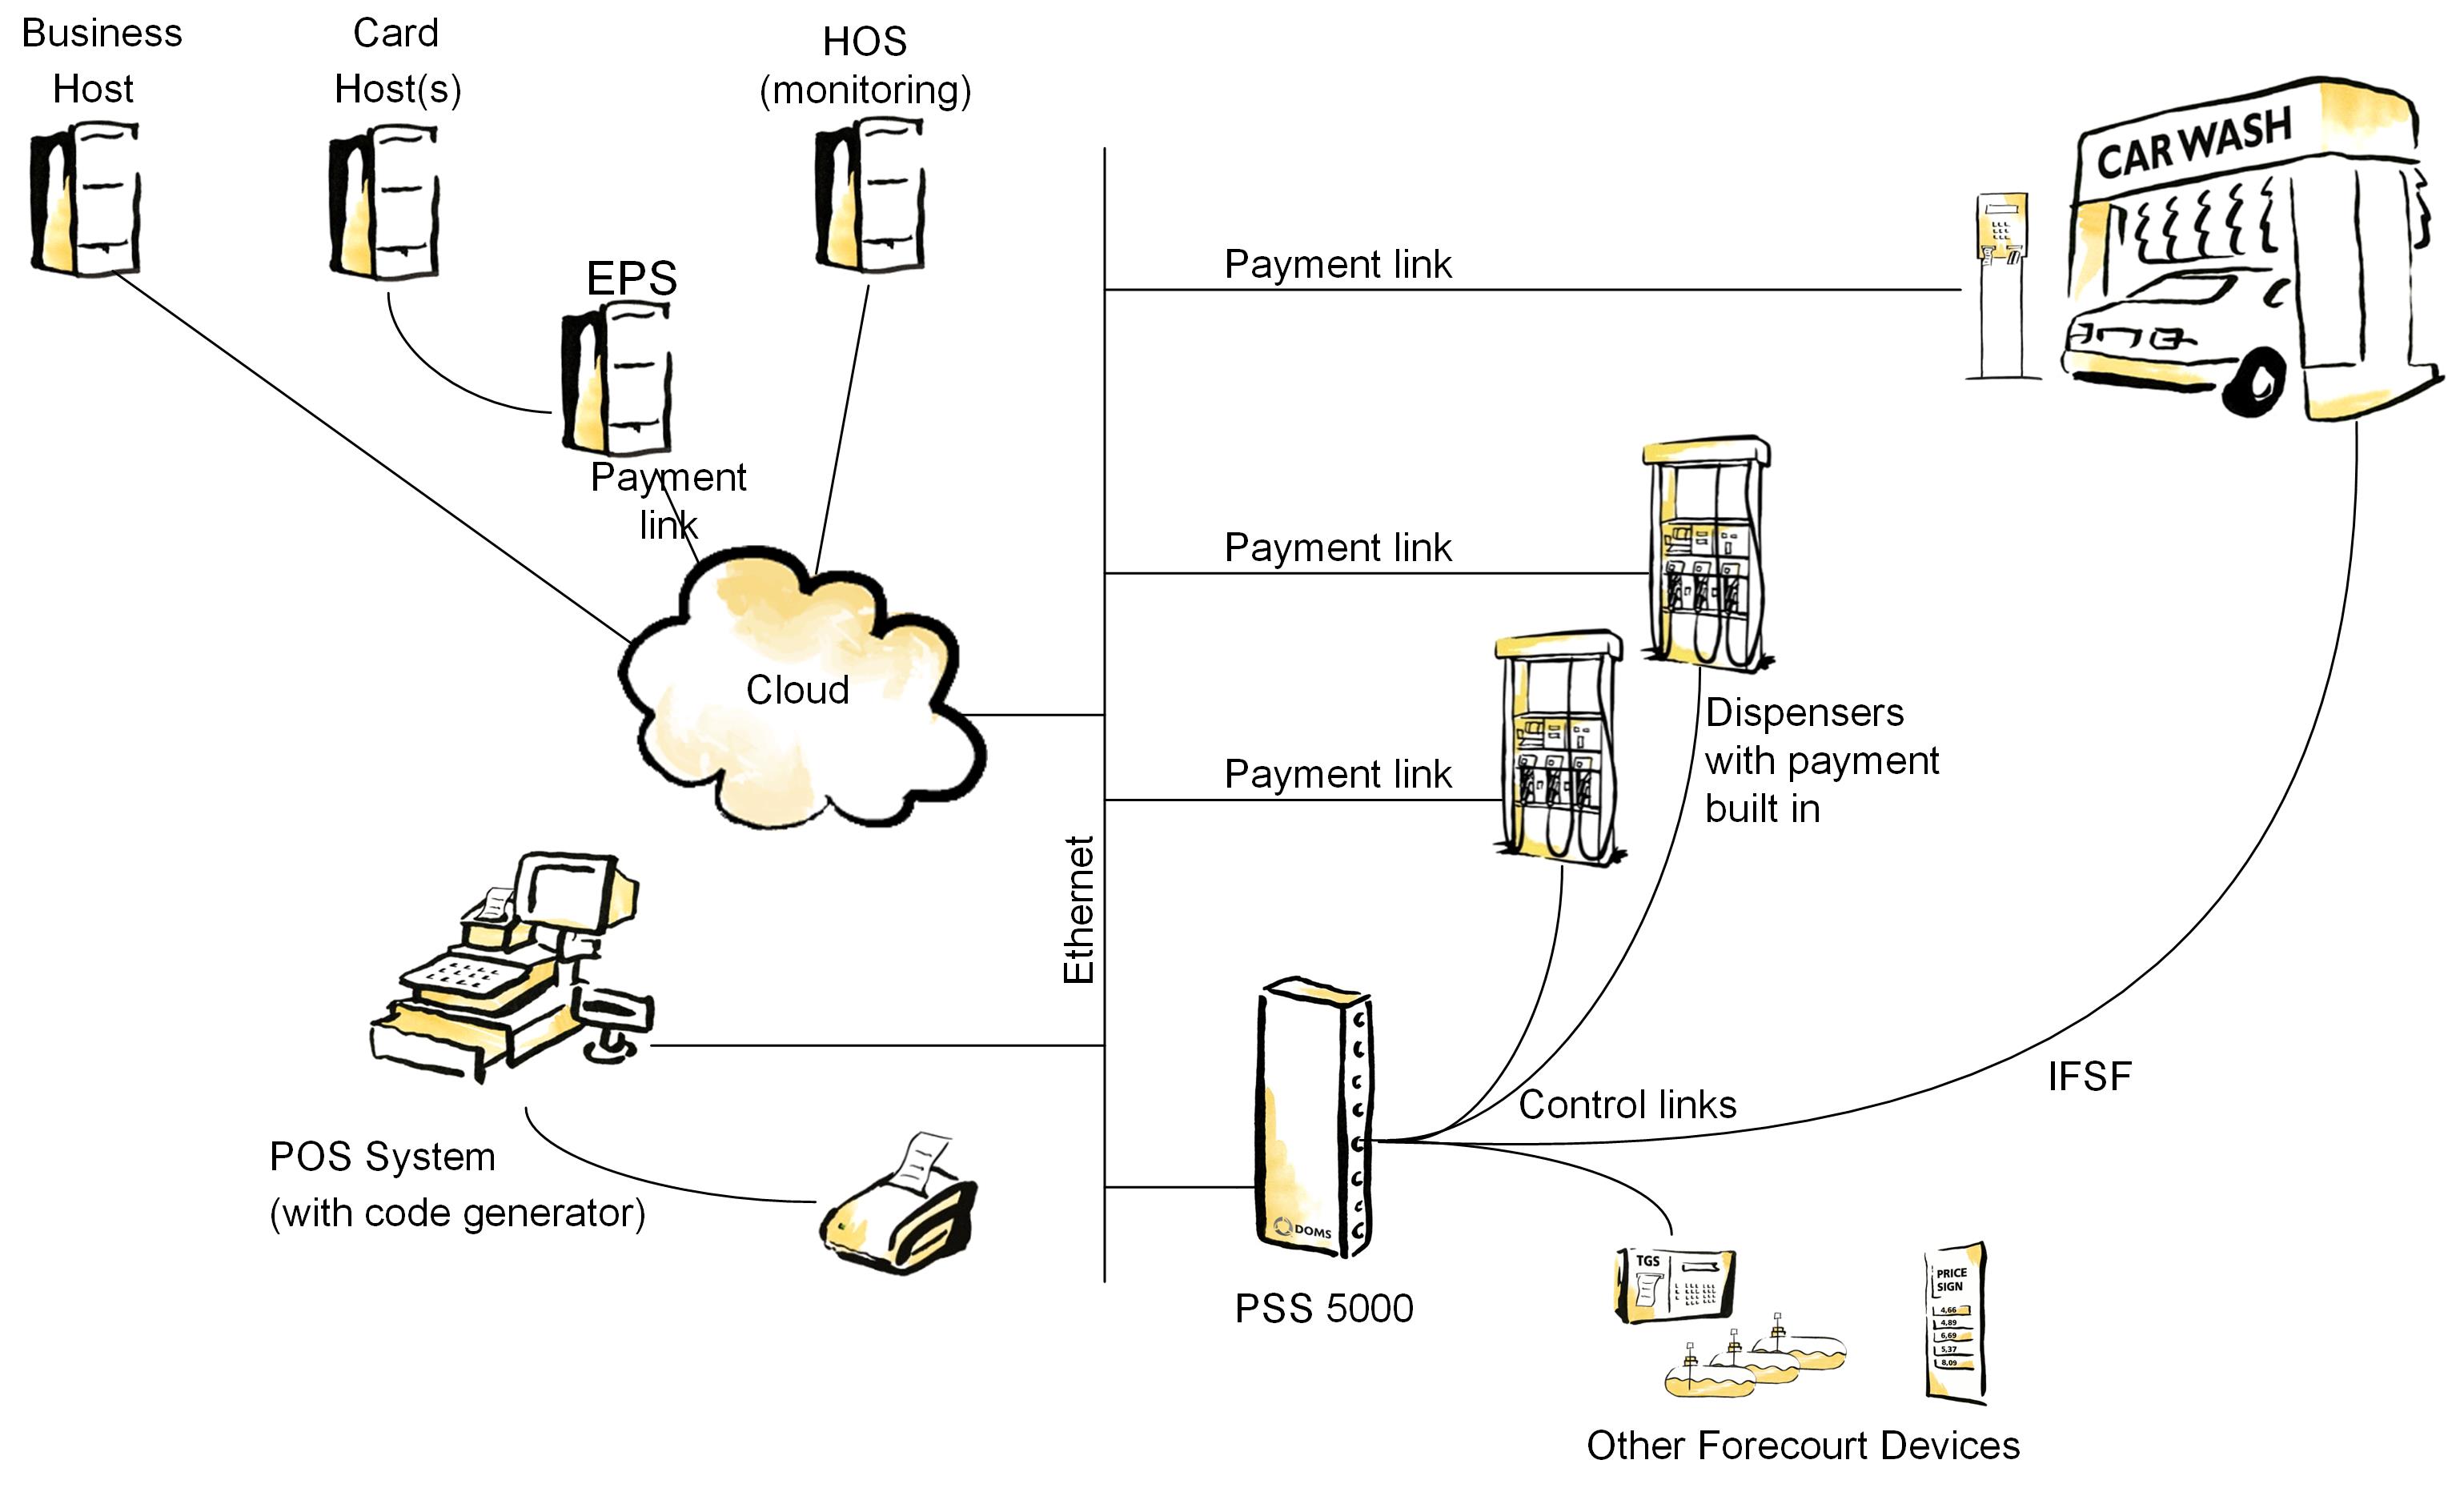 PSS 5000 as integration point to allow reuse of payment and service systems